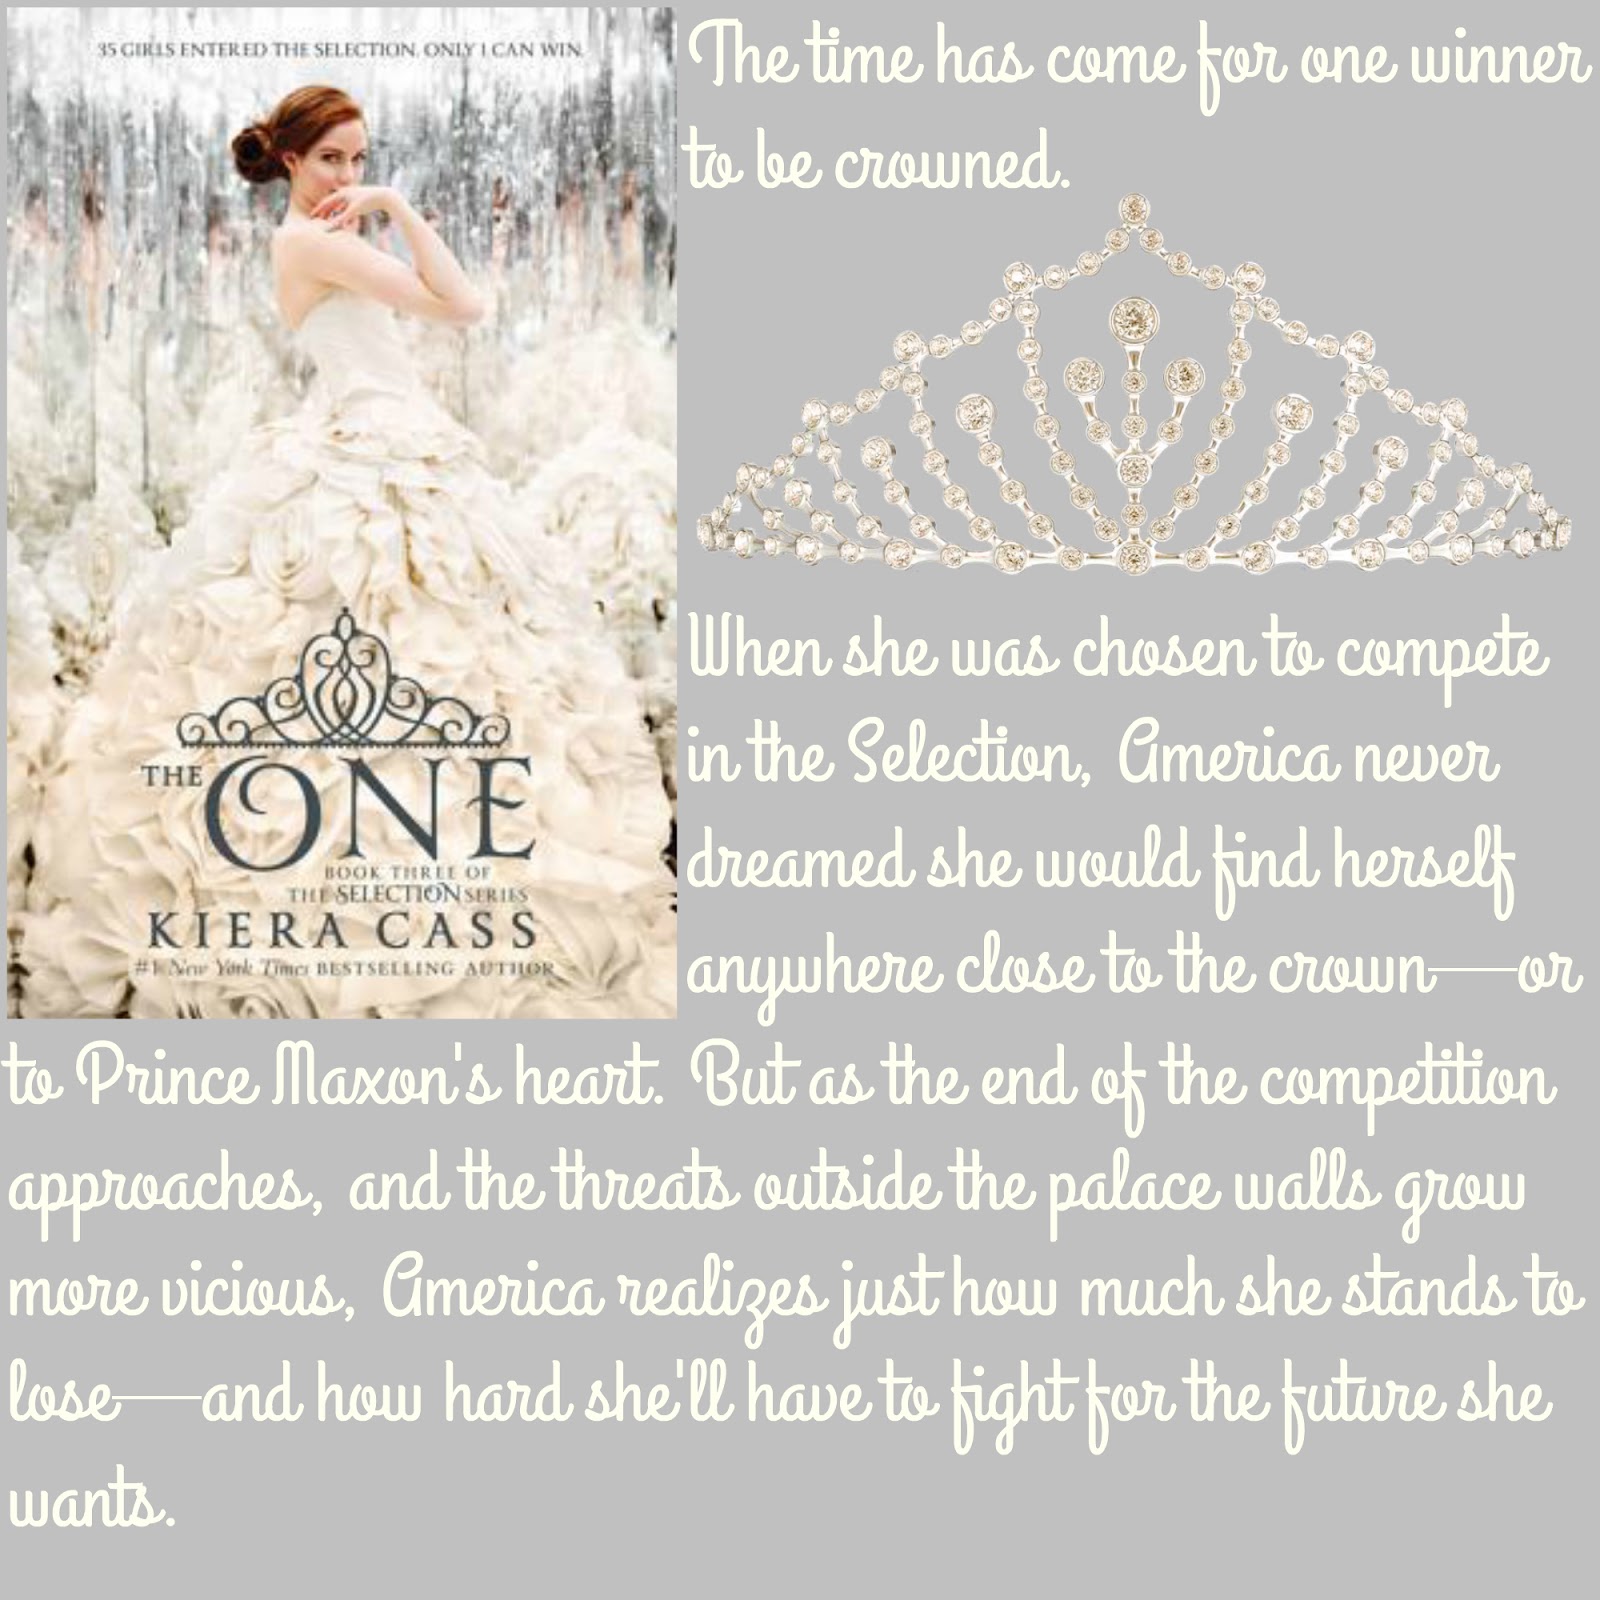 who were the last 3 in the one by kiera cass